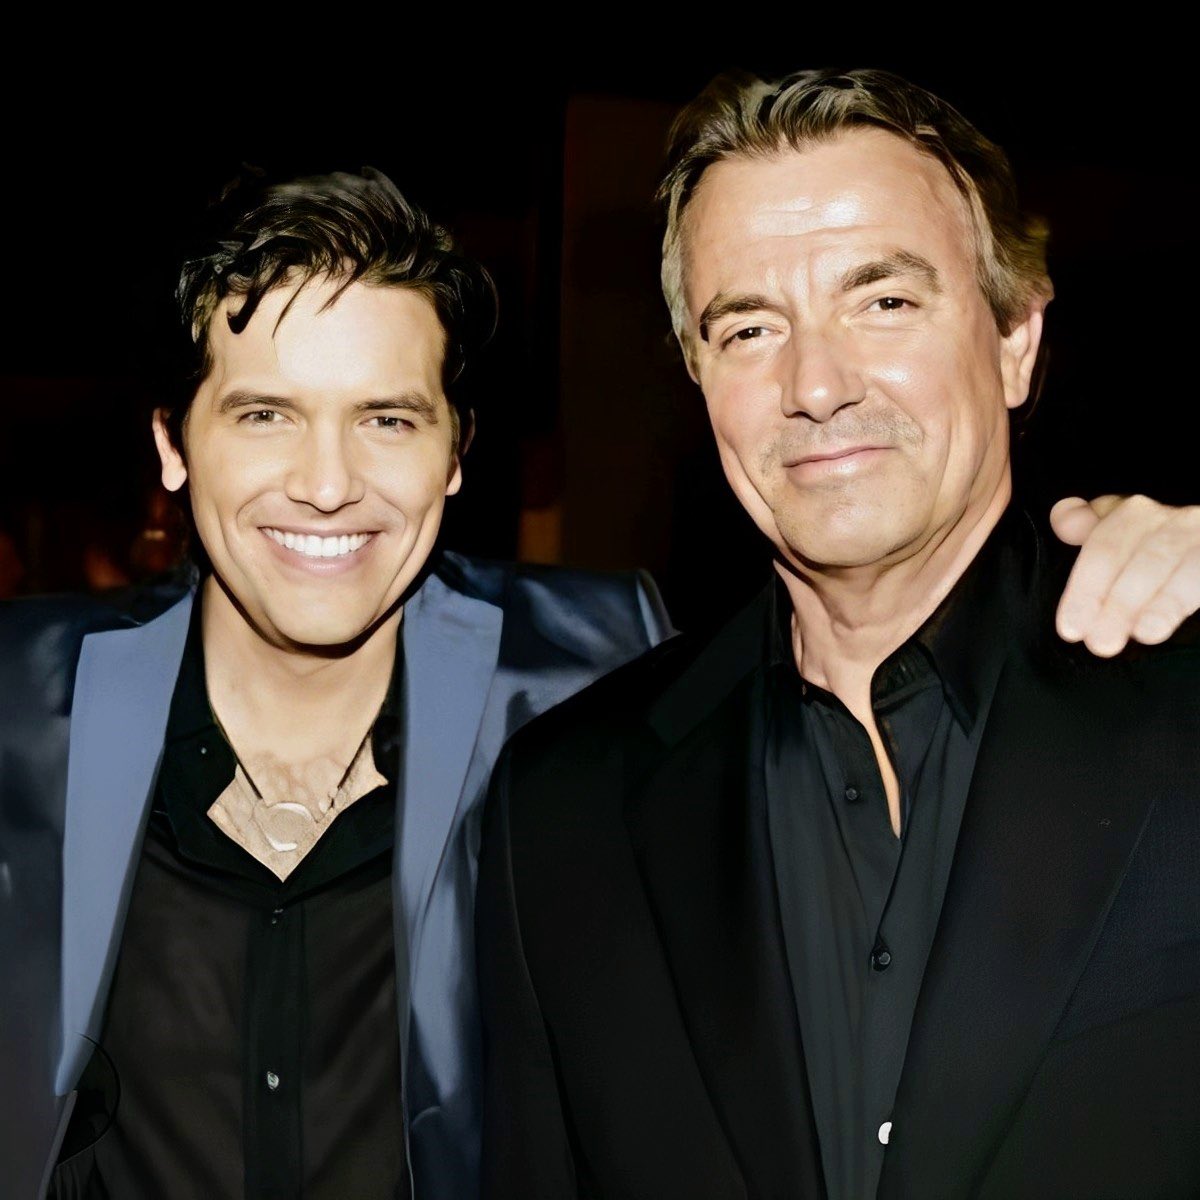 Happy birthday to my wonderful “rock on” brother @EBraeden !! Love you big time!! 🎊🎉🎙️🎶@YandR_CBS @LauraleeB4real @TheRealStafford